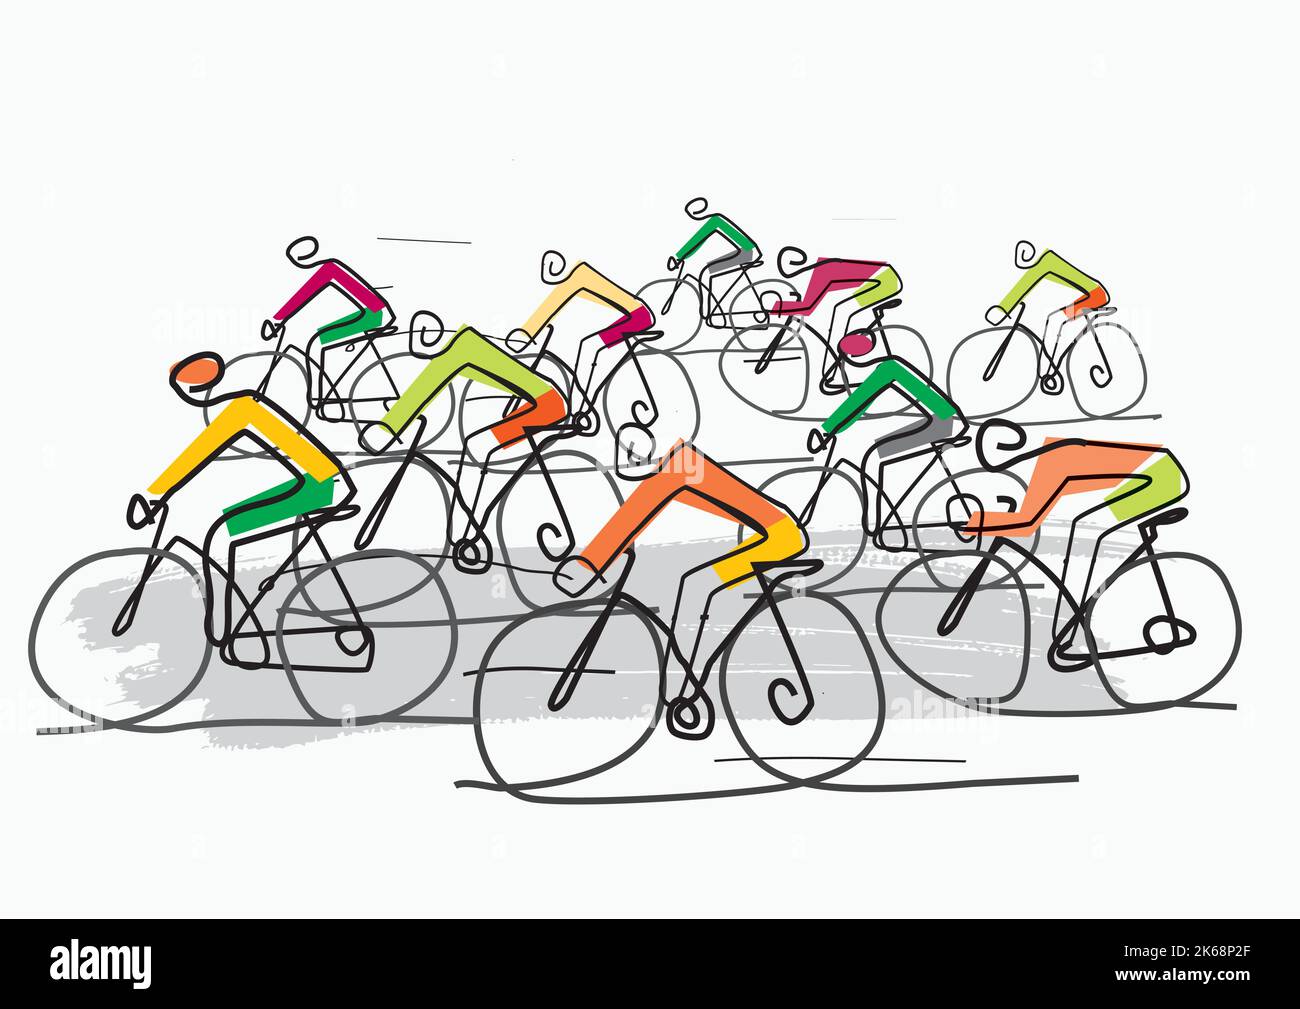 Cycling race, line art stylized cartoon. Illustration of group of cyclists on a road. Continuous Line Drawing. Vector available. Stock Vector